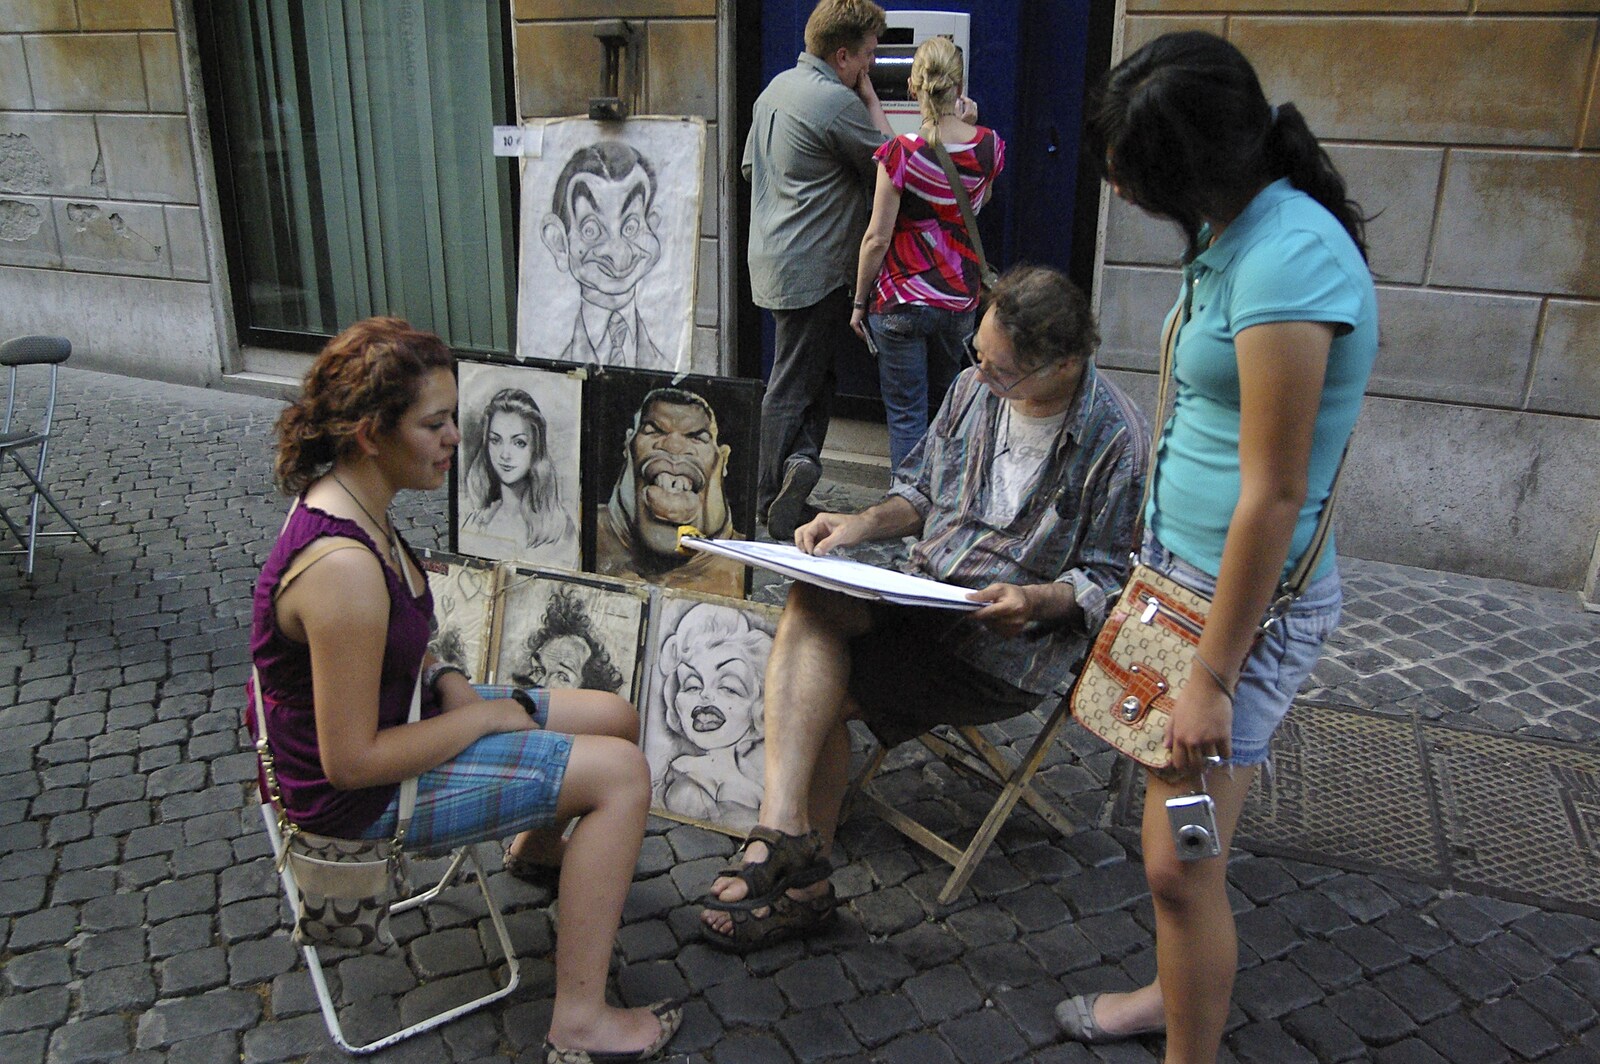 A caricature artist from A Sojourn in The Eternal City, Rome, Italy - 22nd July 2008